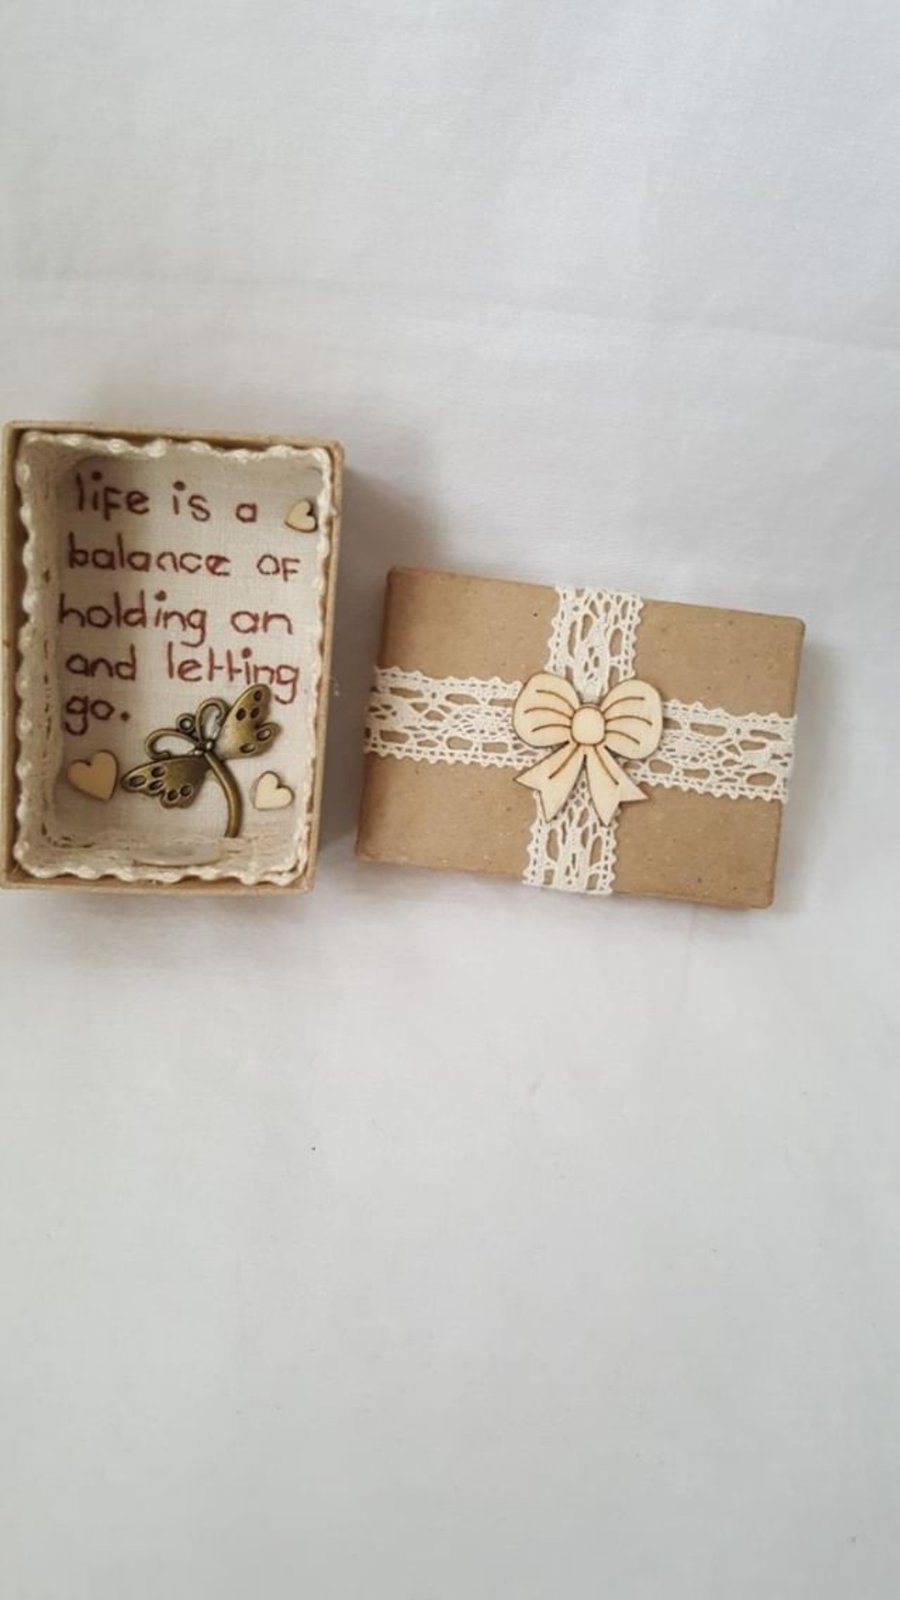 small miniature art diorama with a message 'life is a balance...................